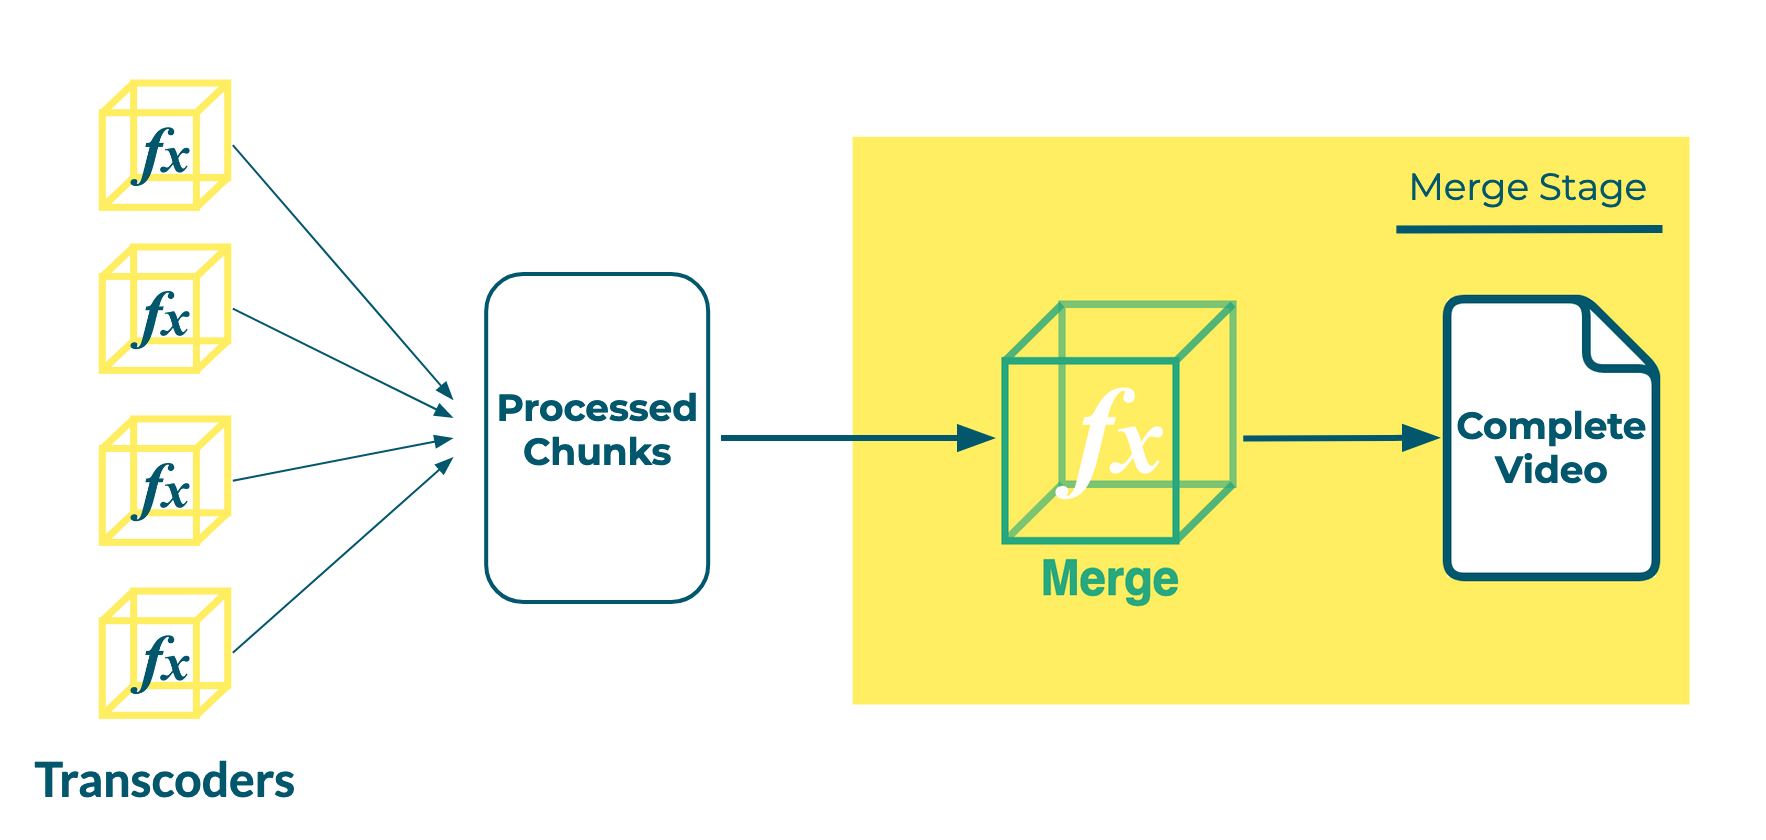 Merge step invoked after last segment transcoded